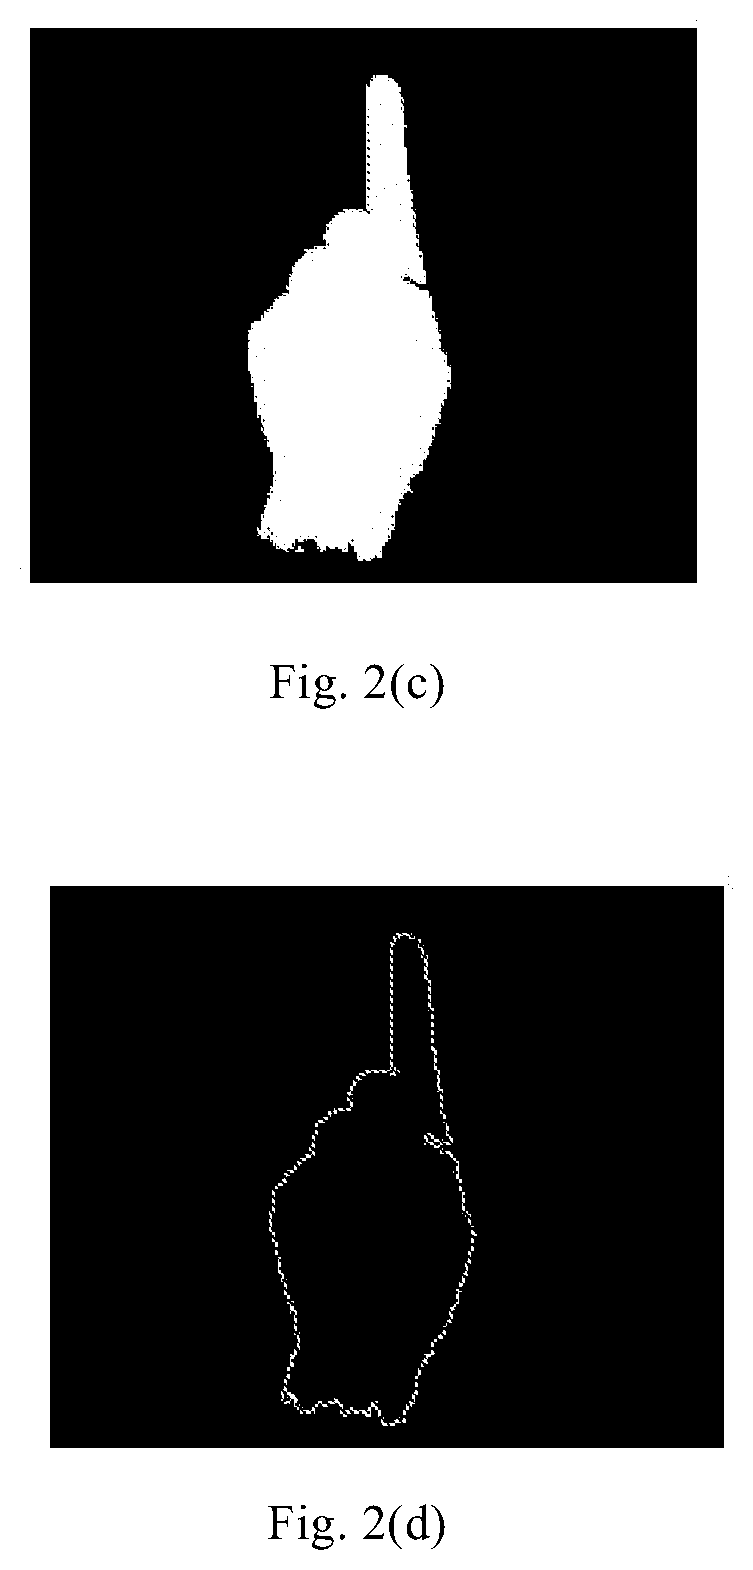 Gesture shaking recognition method and apparatus, and gesture recognition method